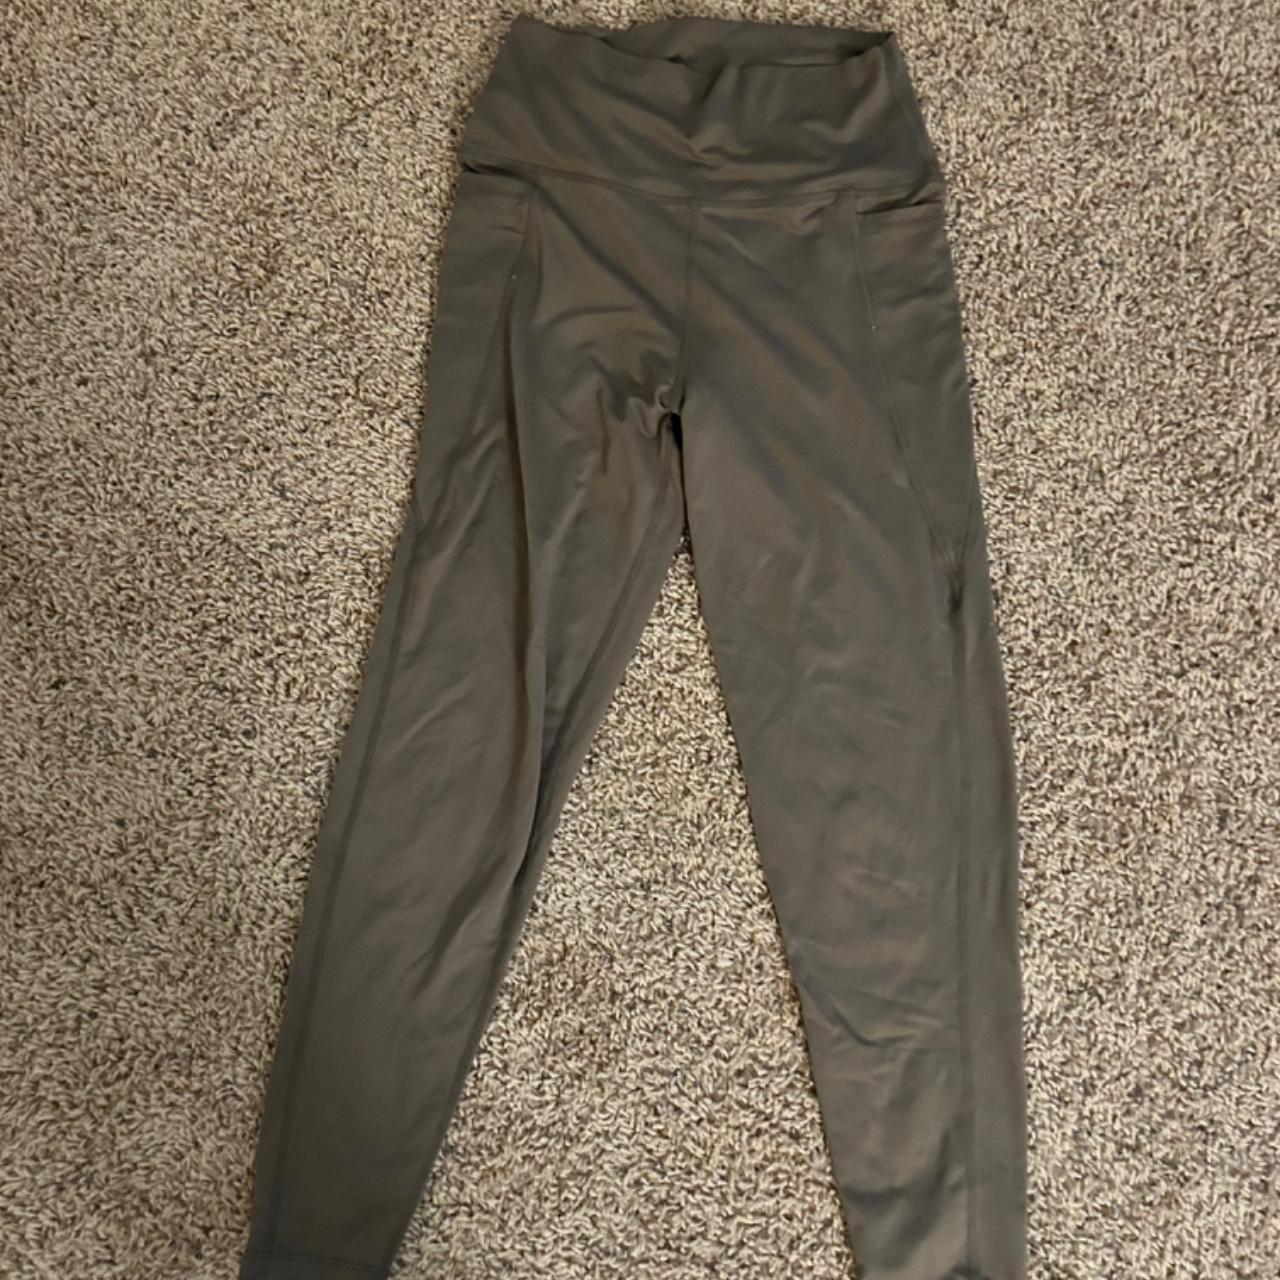 SAGE Collective Brown Leggings Very soft and - Depop